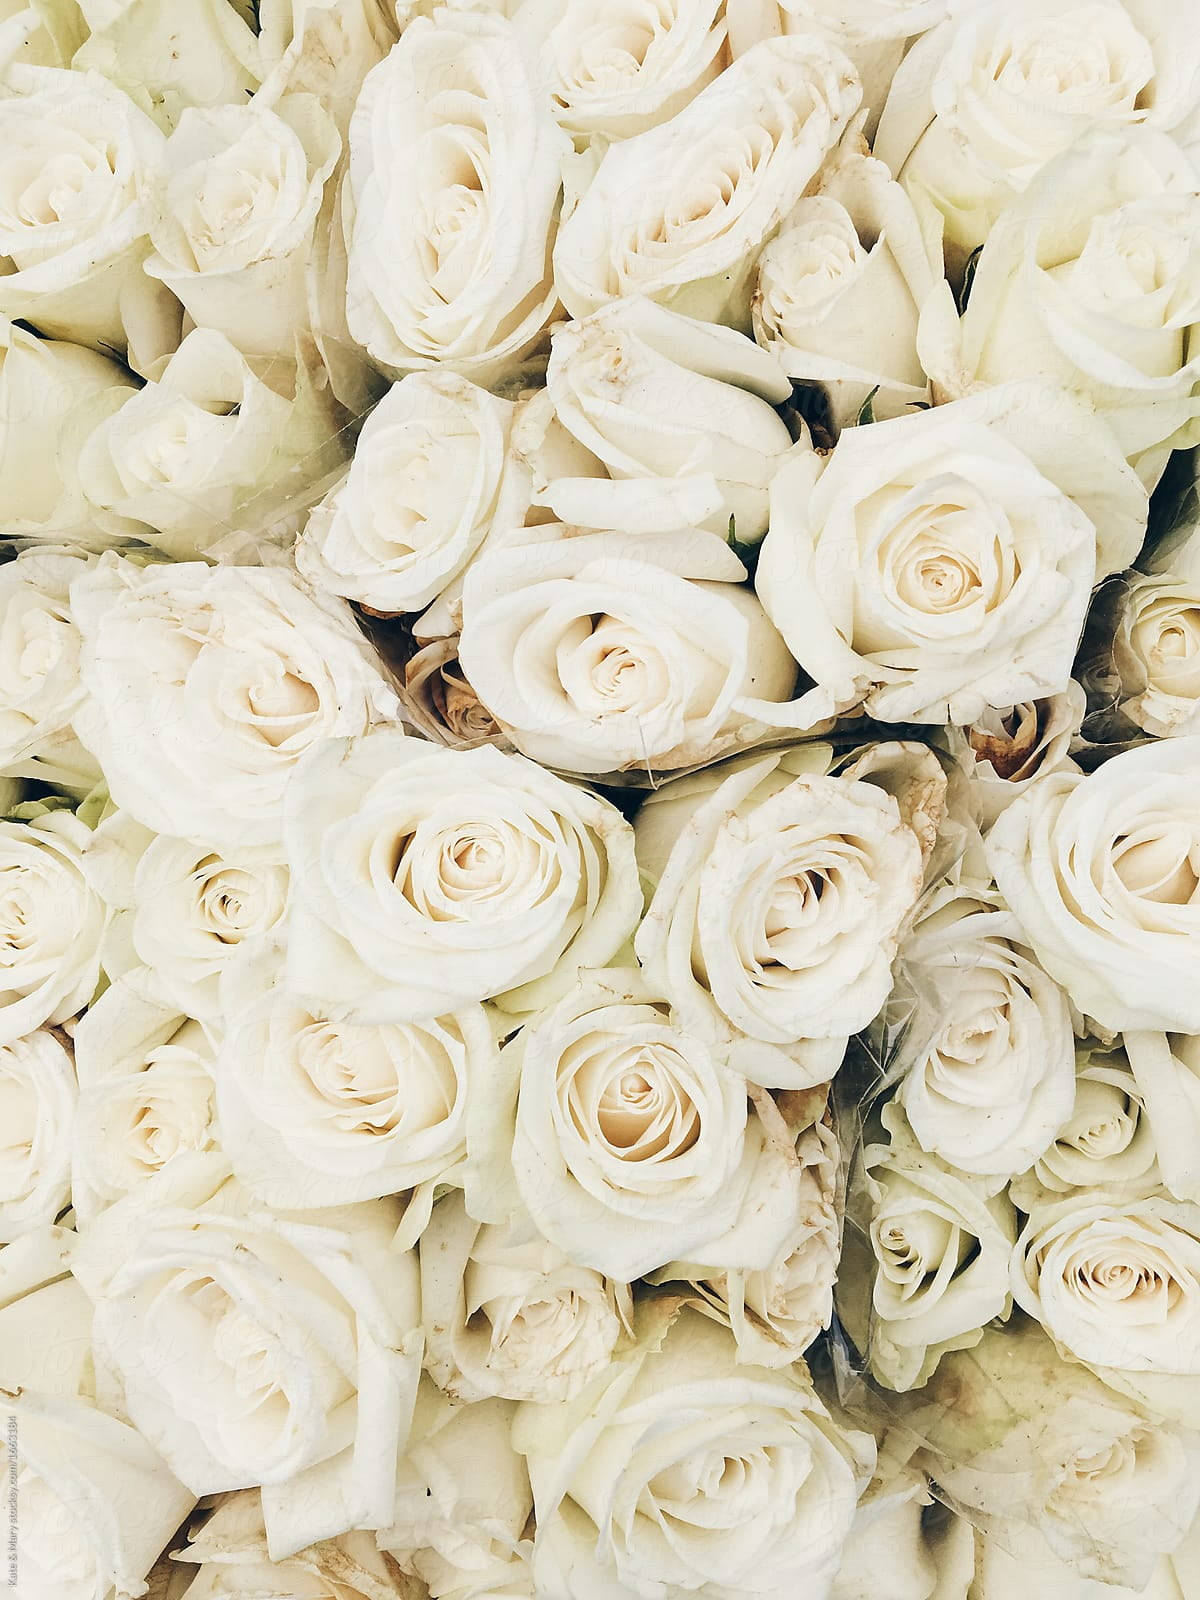 Cool White Roses Closeup Background